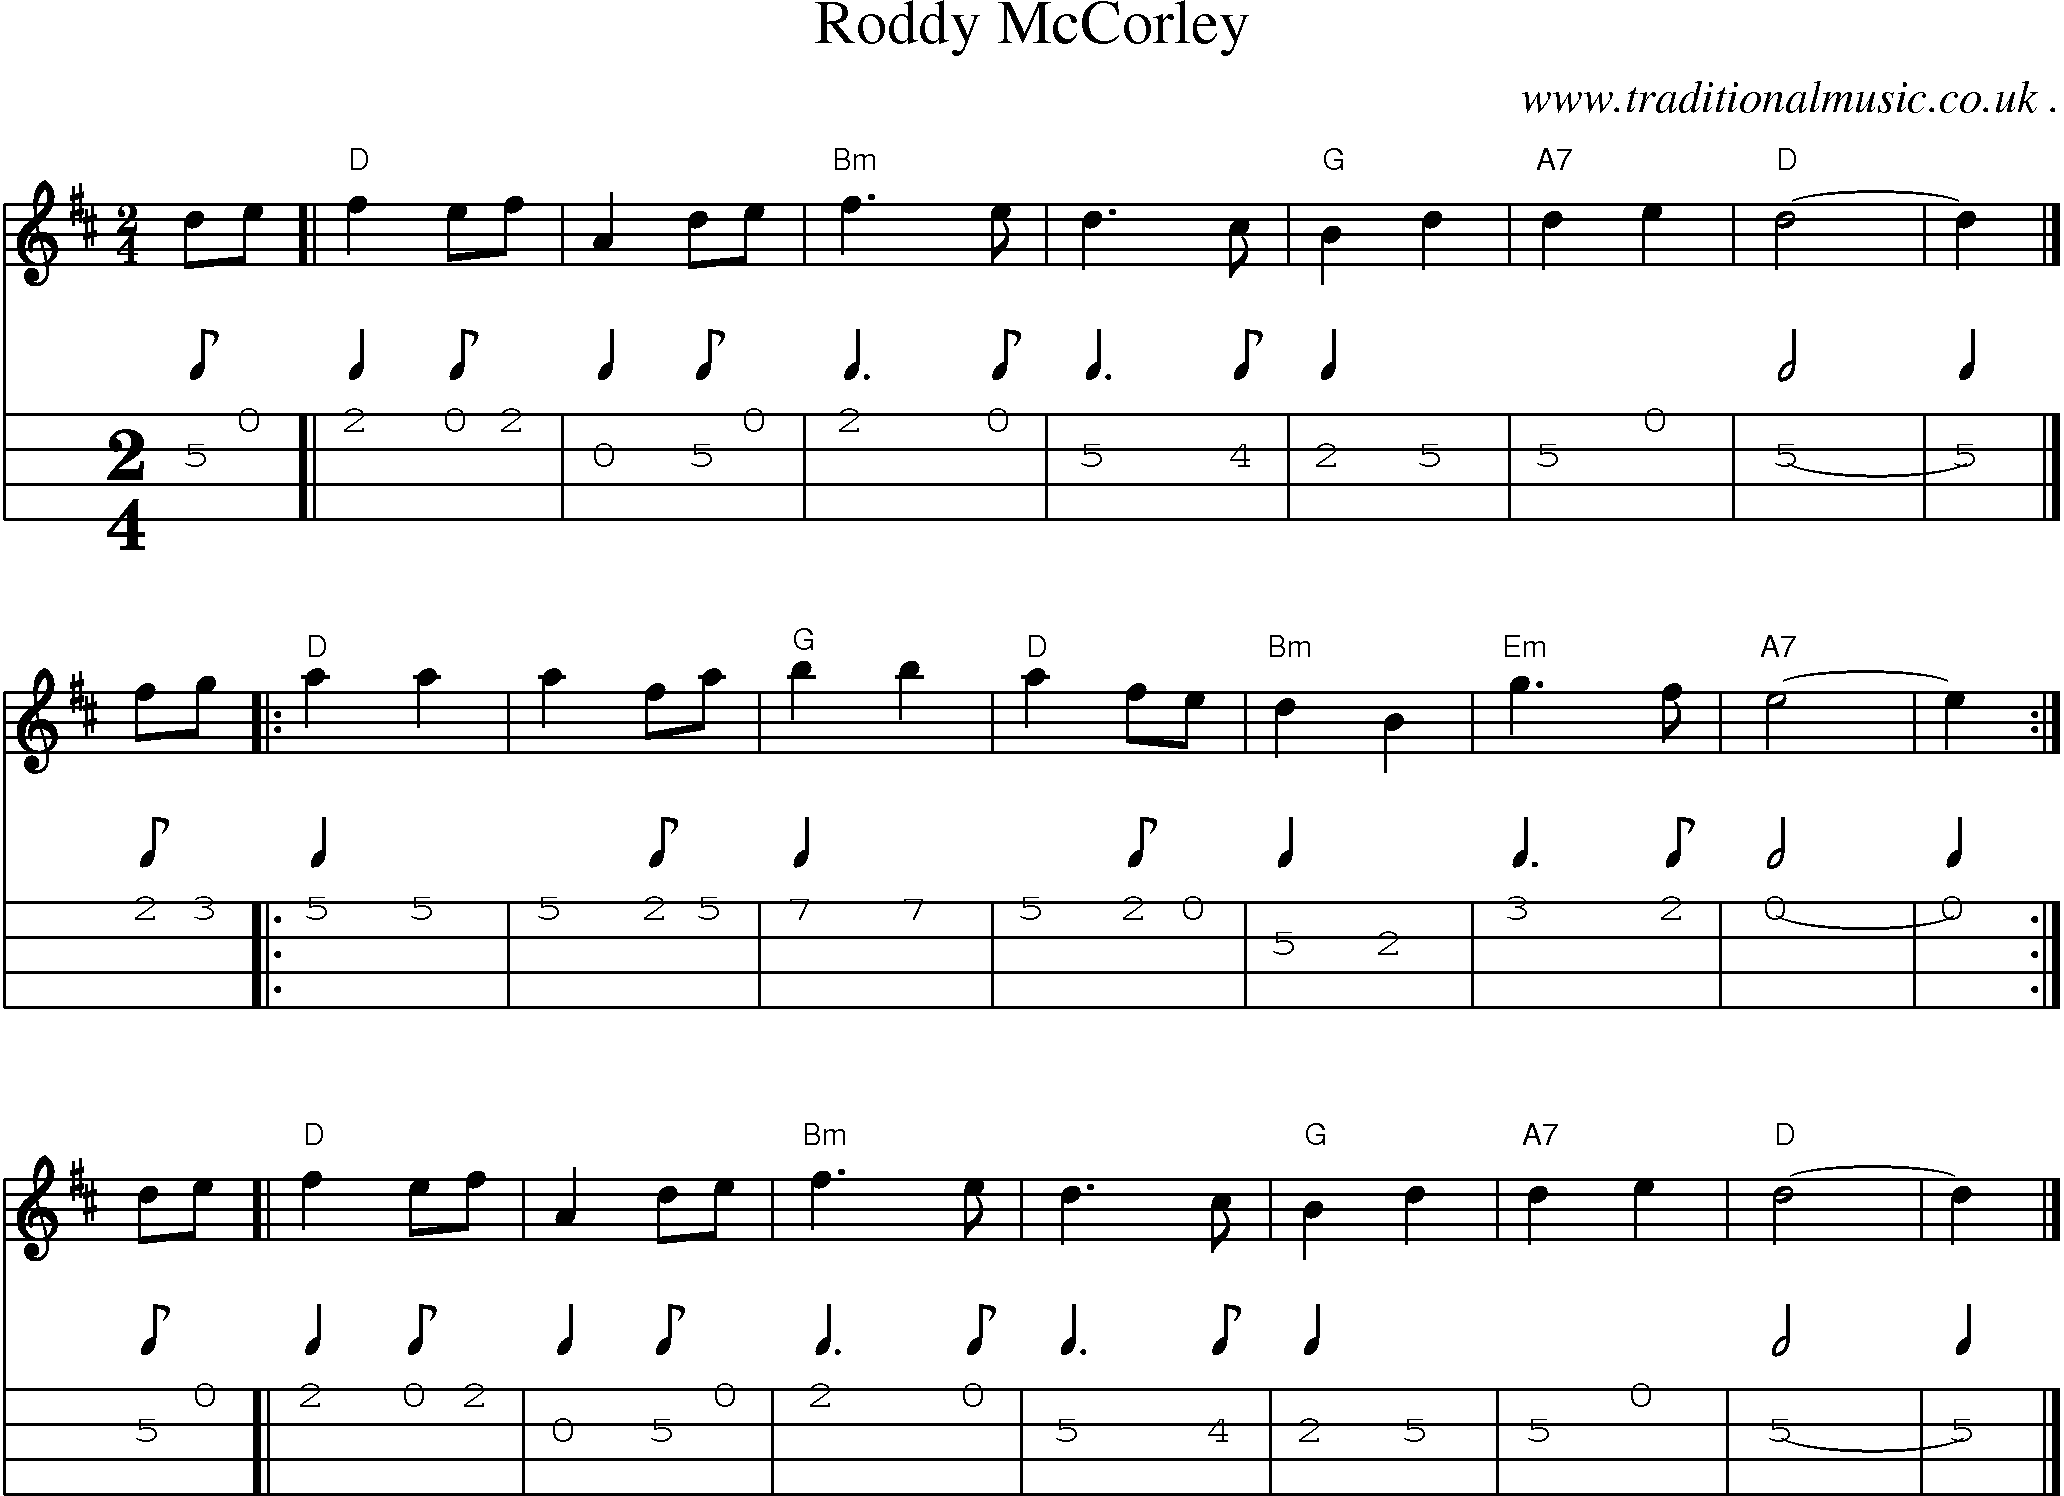 Sheet-music  score, Chords and Mandolin Tabs for Roddy Mccorley